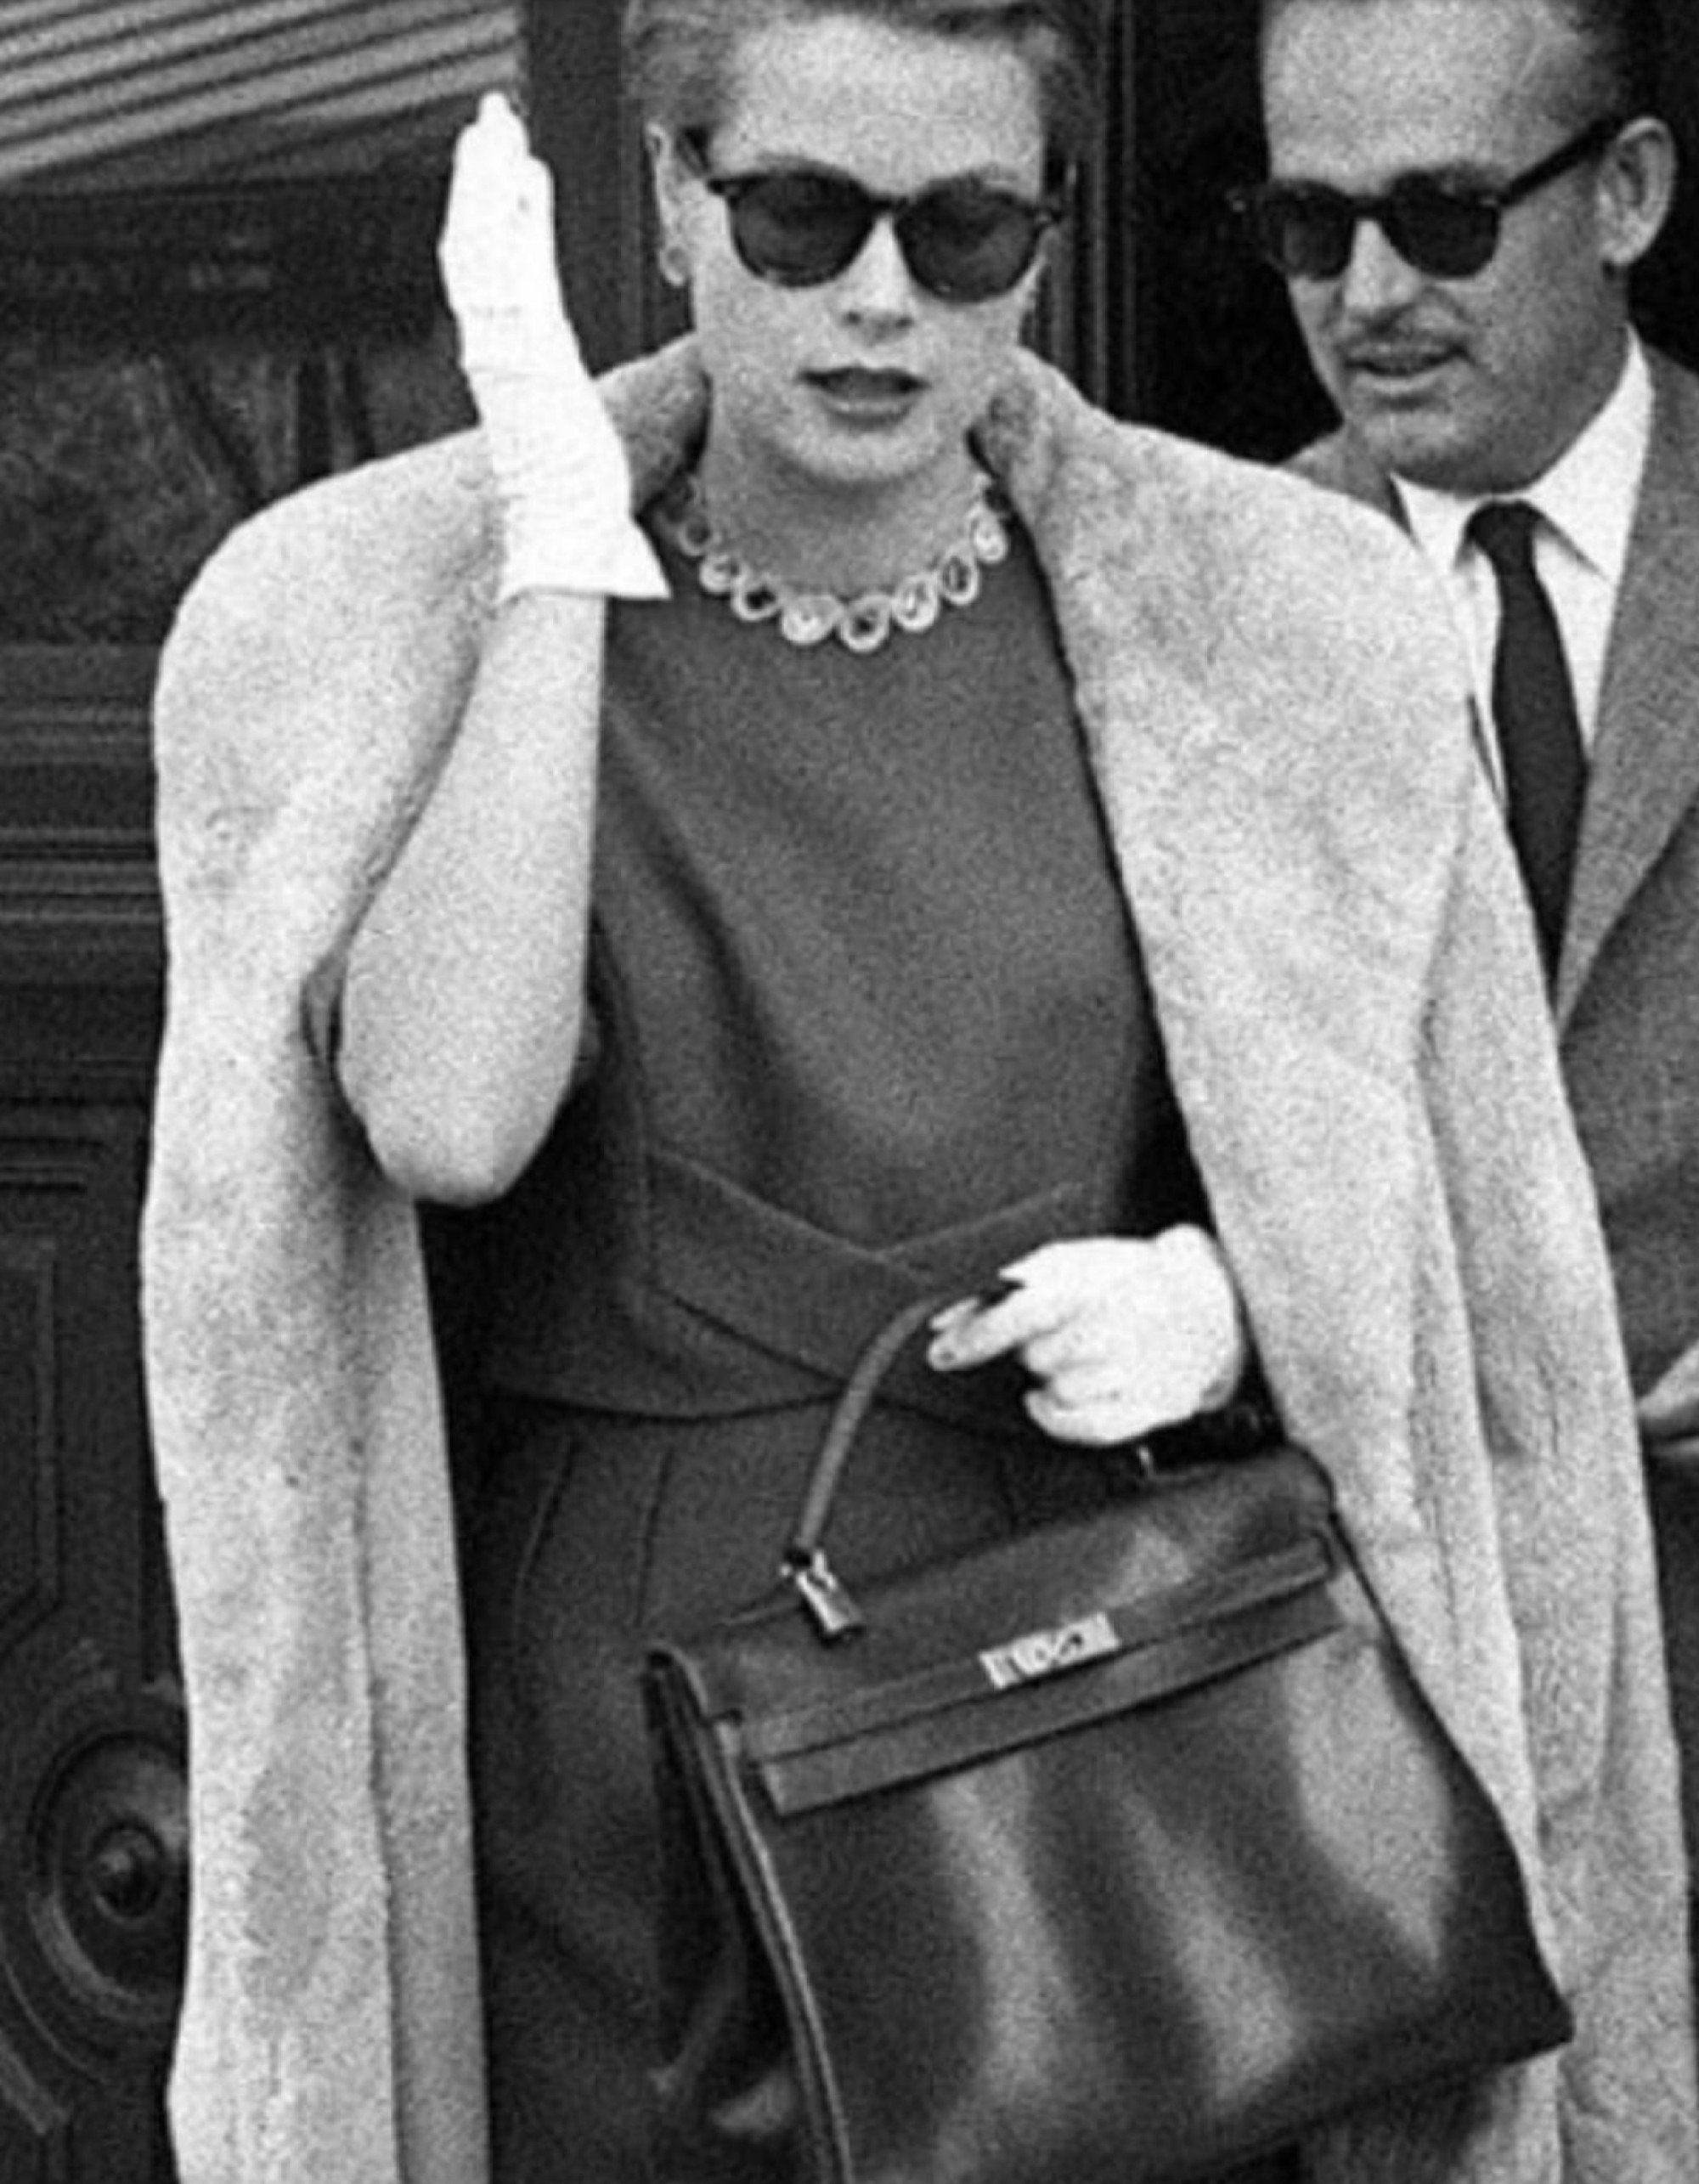 7 designer handbags named after famous female icons: from royals Princess  Diana's Lady Dior and Princess Grace of Monaco's Hermès Kelly, to Selena  Gomez's Coach Trail and Jackie Kennedy's Gucci bag